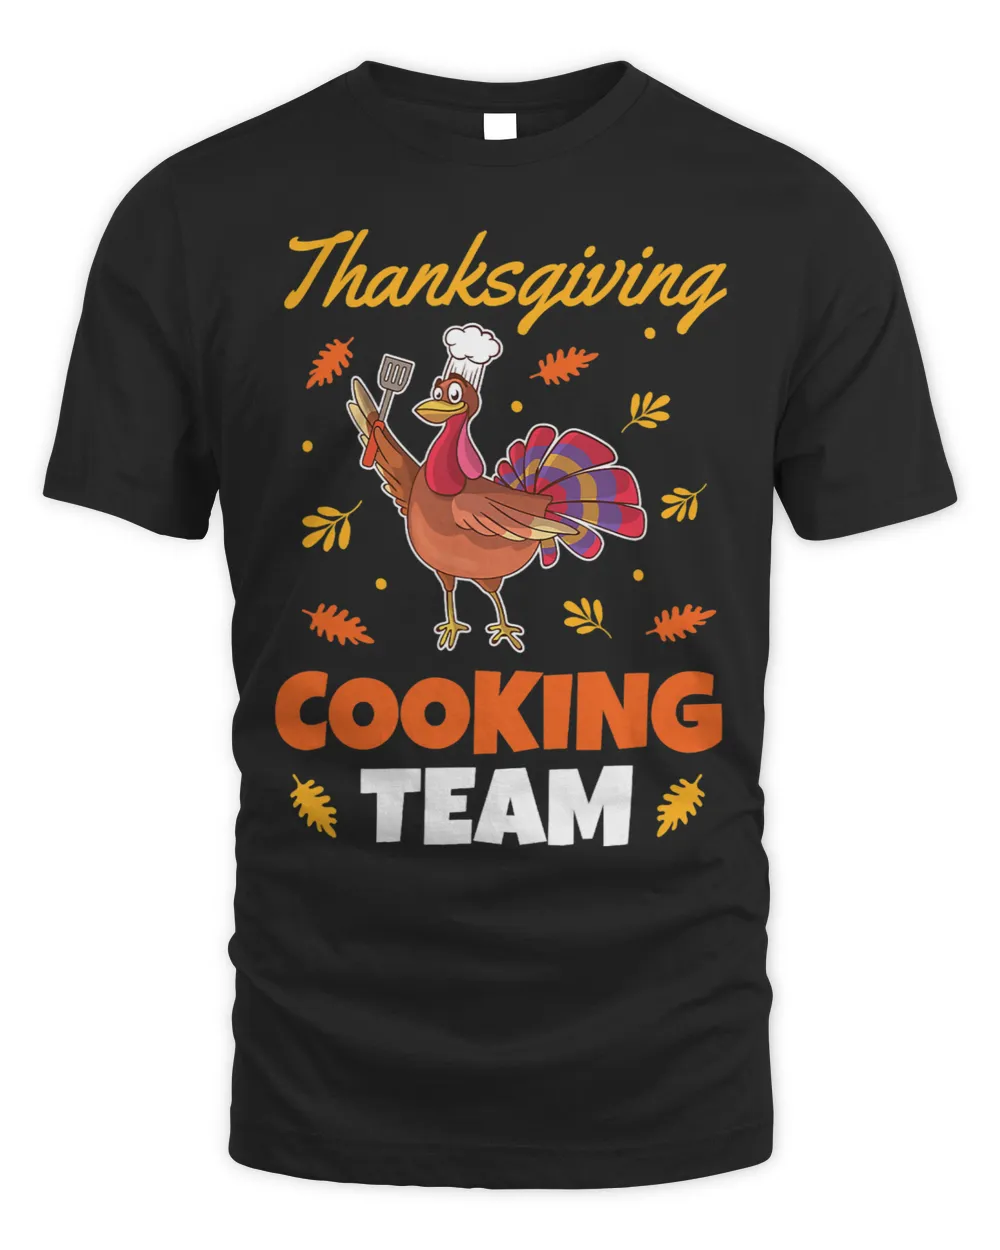 Funny Turkey Chef Outfit Men Women Thanksgiving Cooking Team